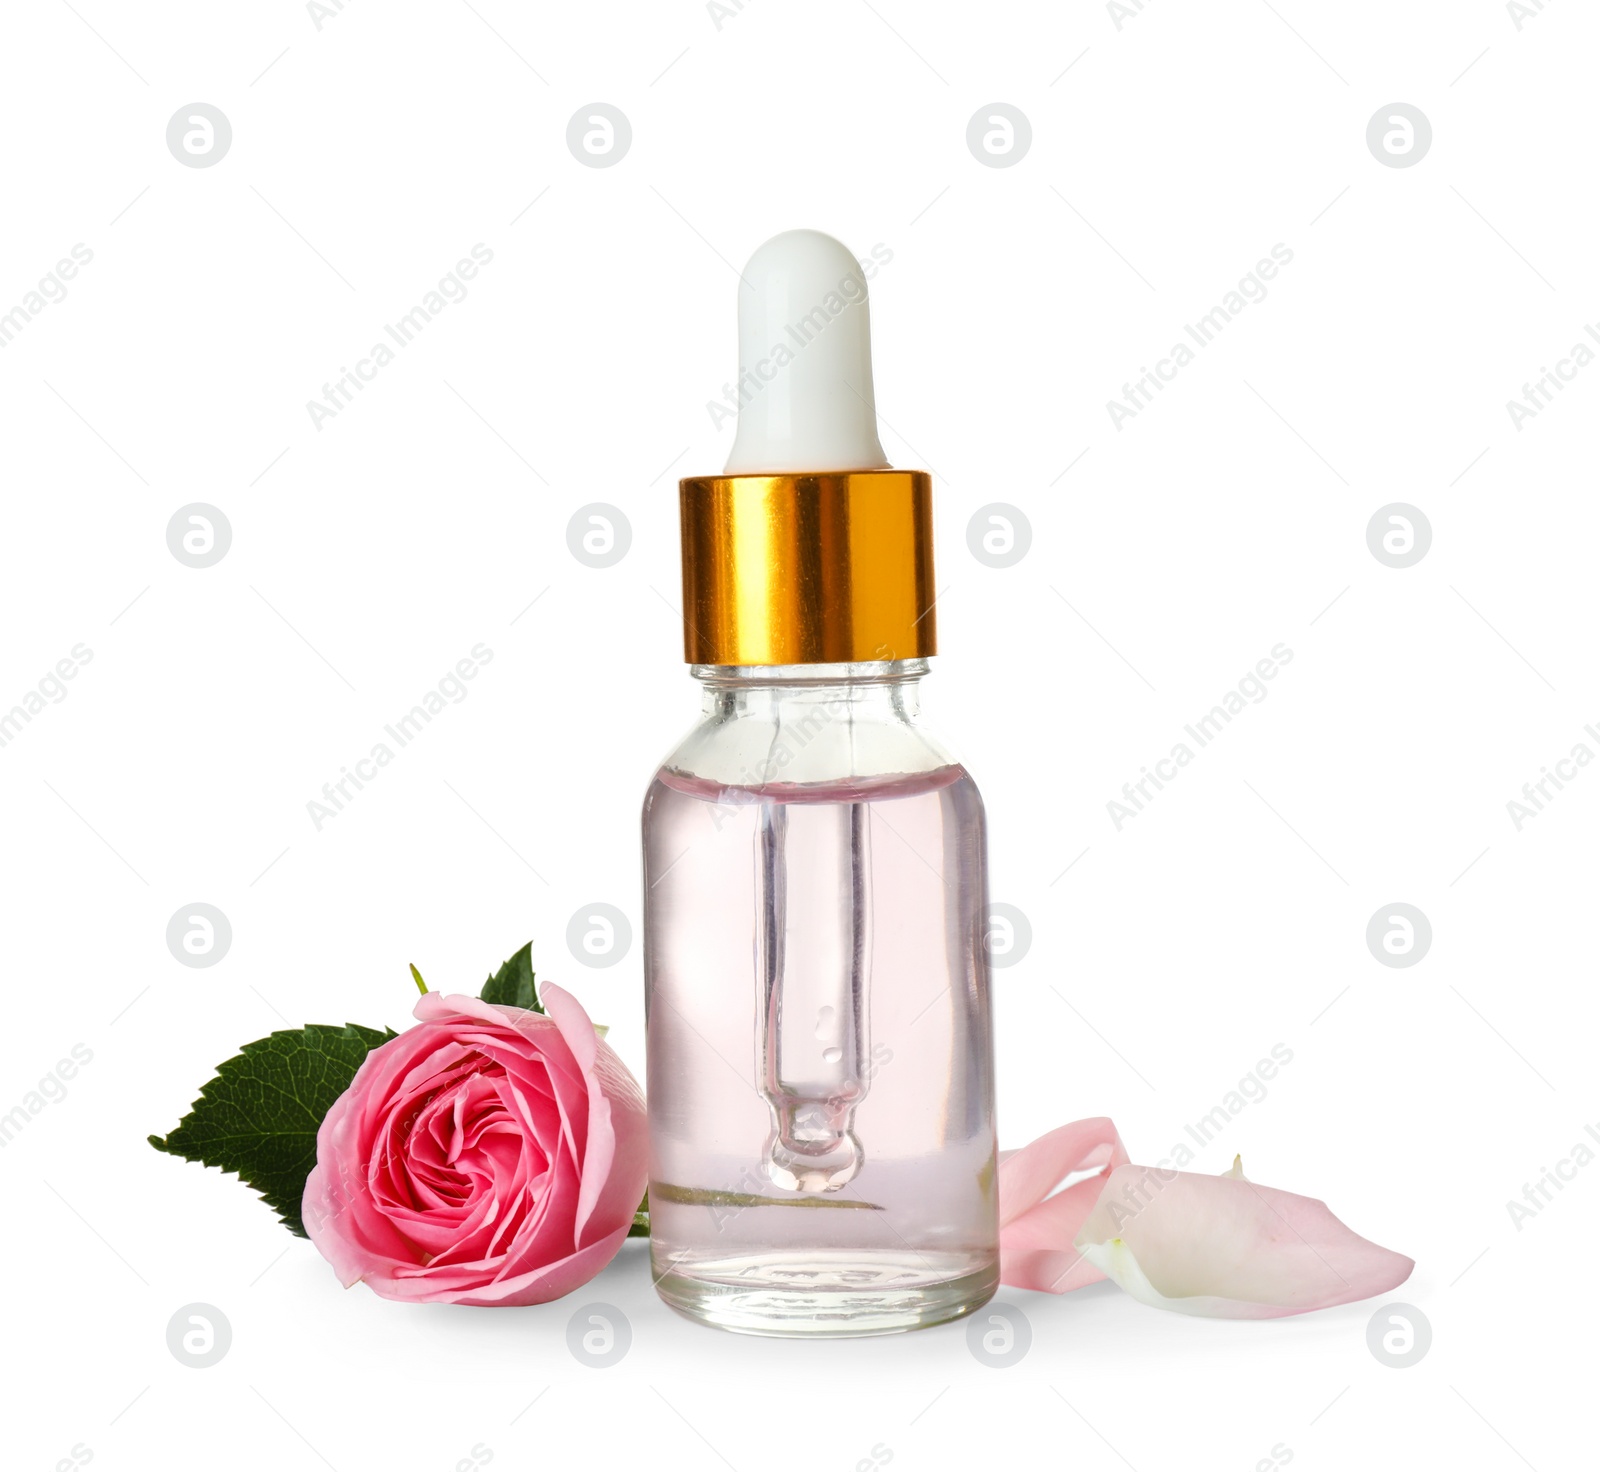 Photo of Bottle of essential oil and rose on white background